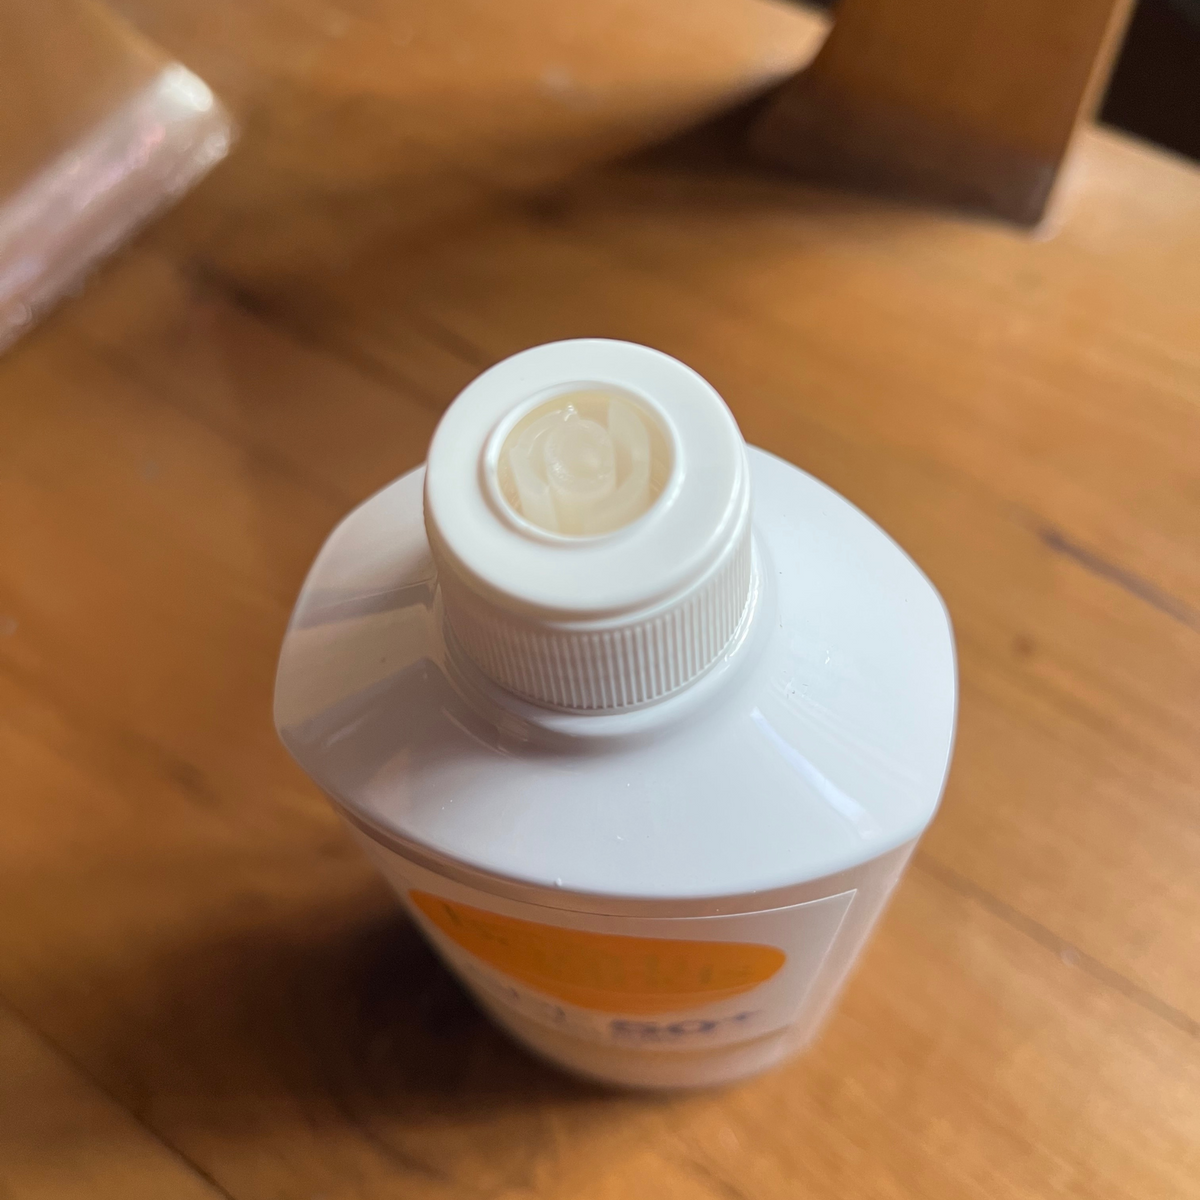 SPF 50+ Fragrance Free Sunscreen Lotion with Broken Pump